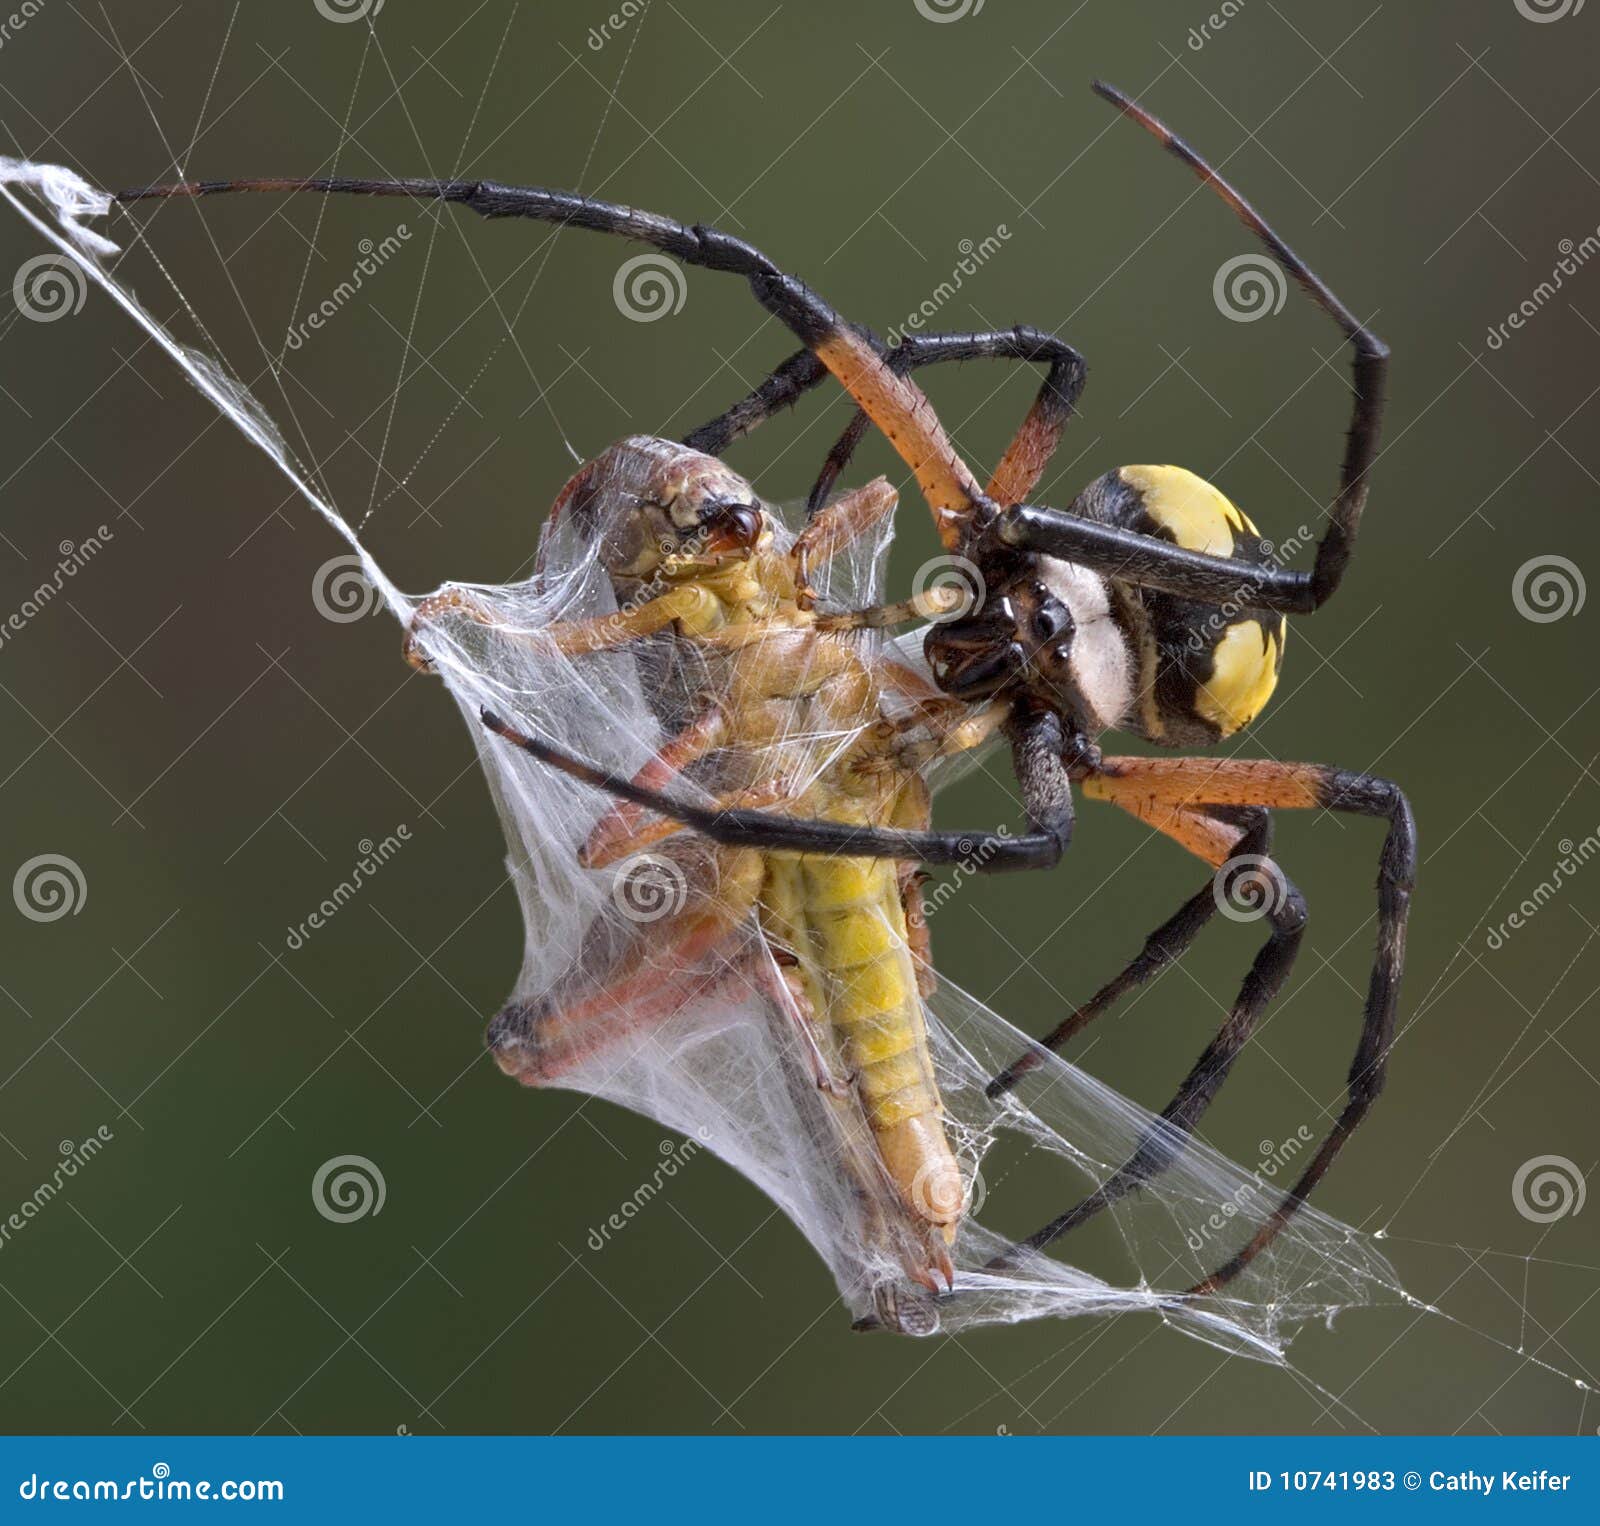 argiope-spider-wrapping-hopper-10741983.jpg